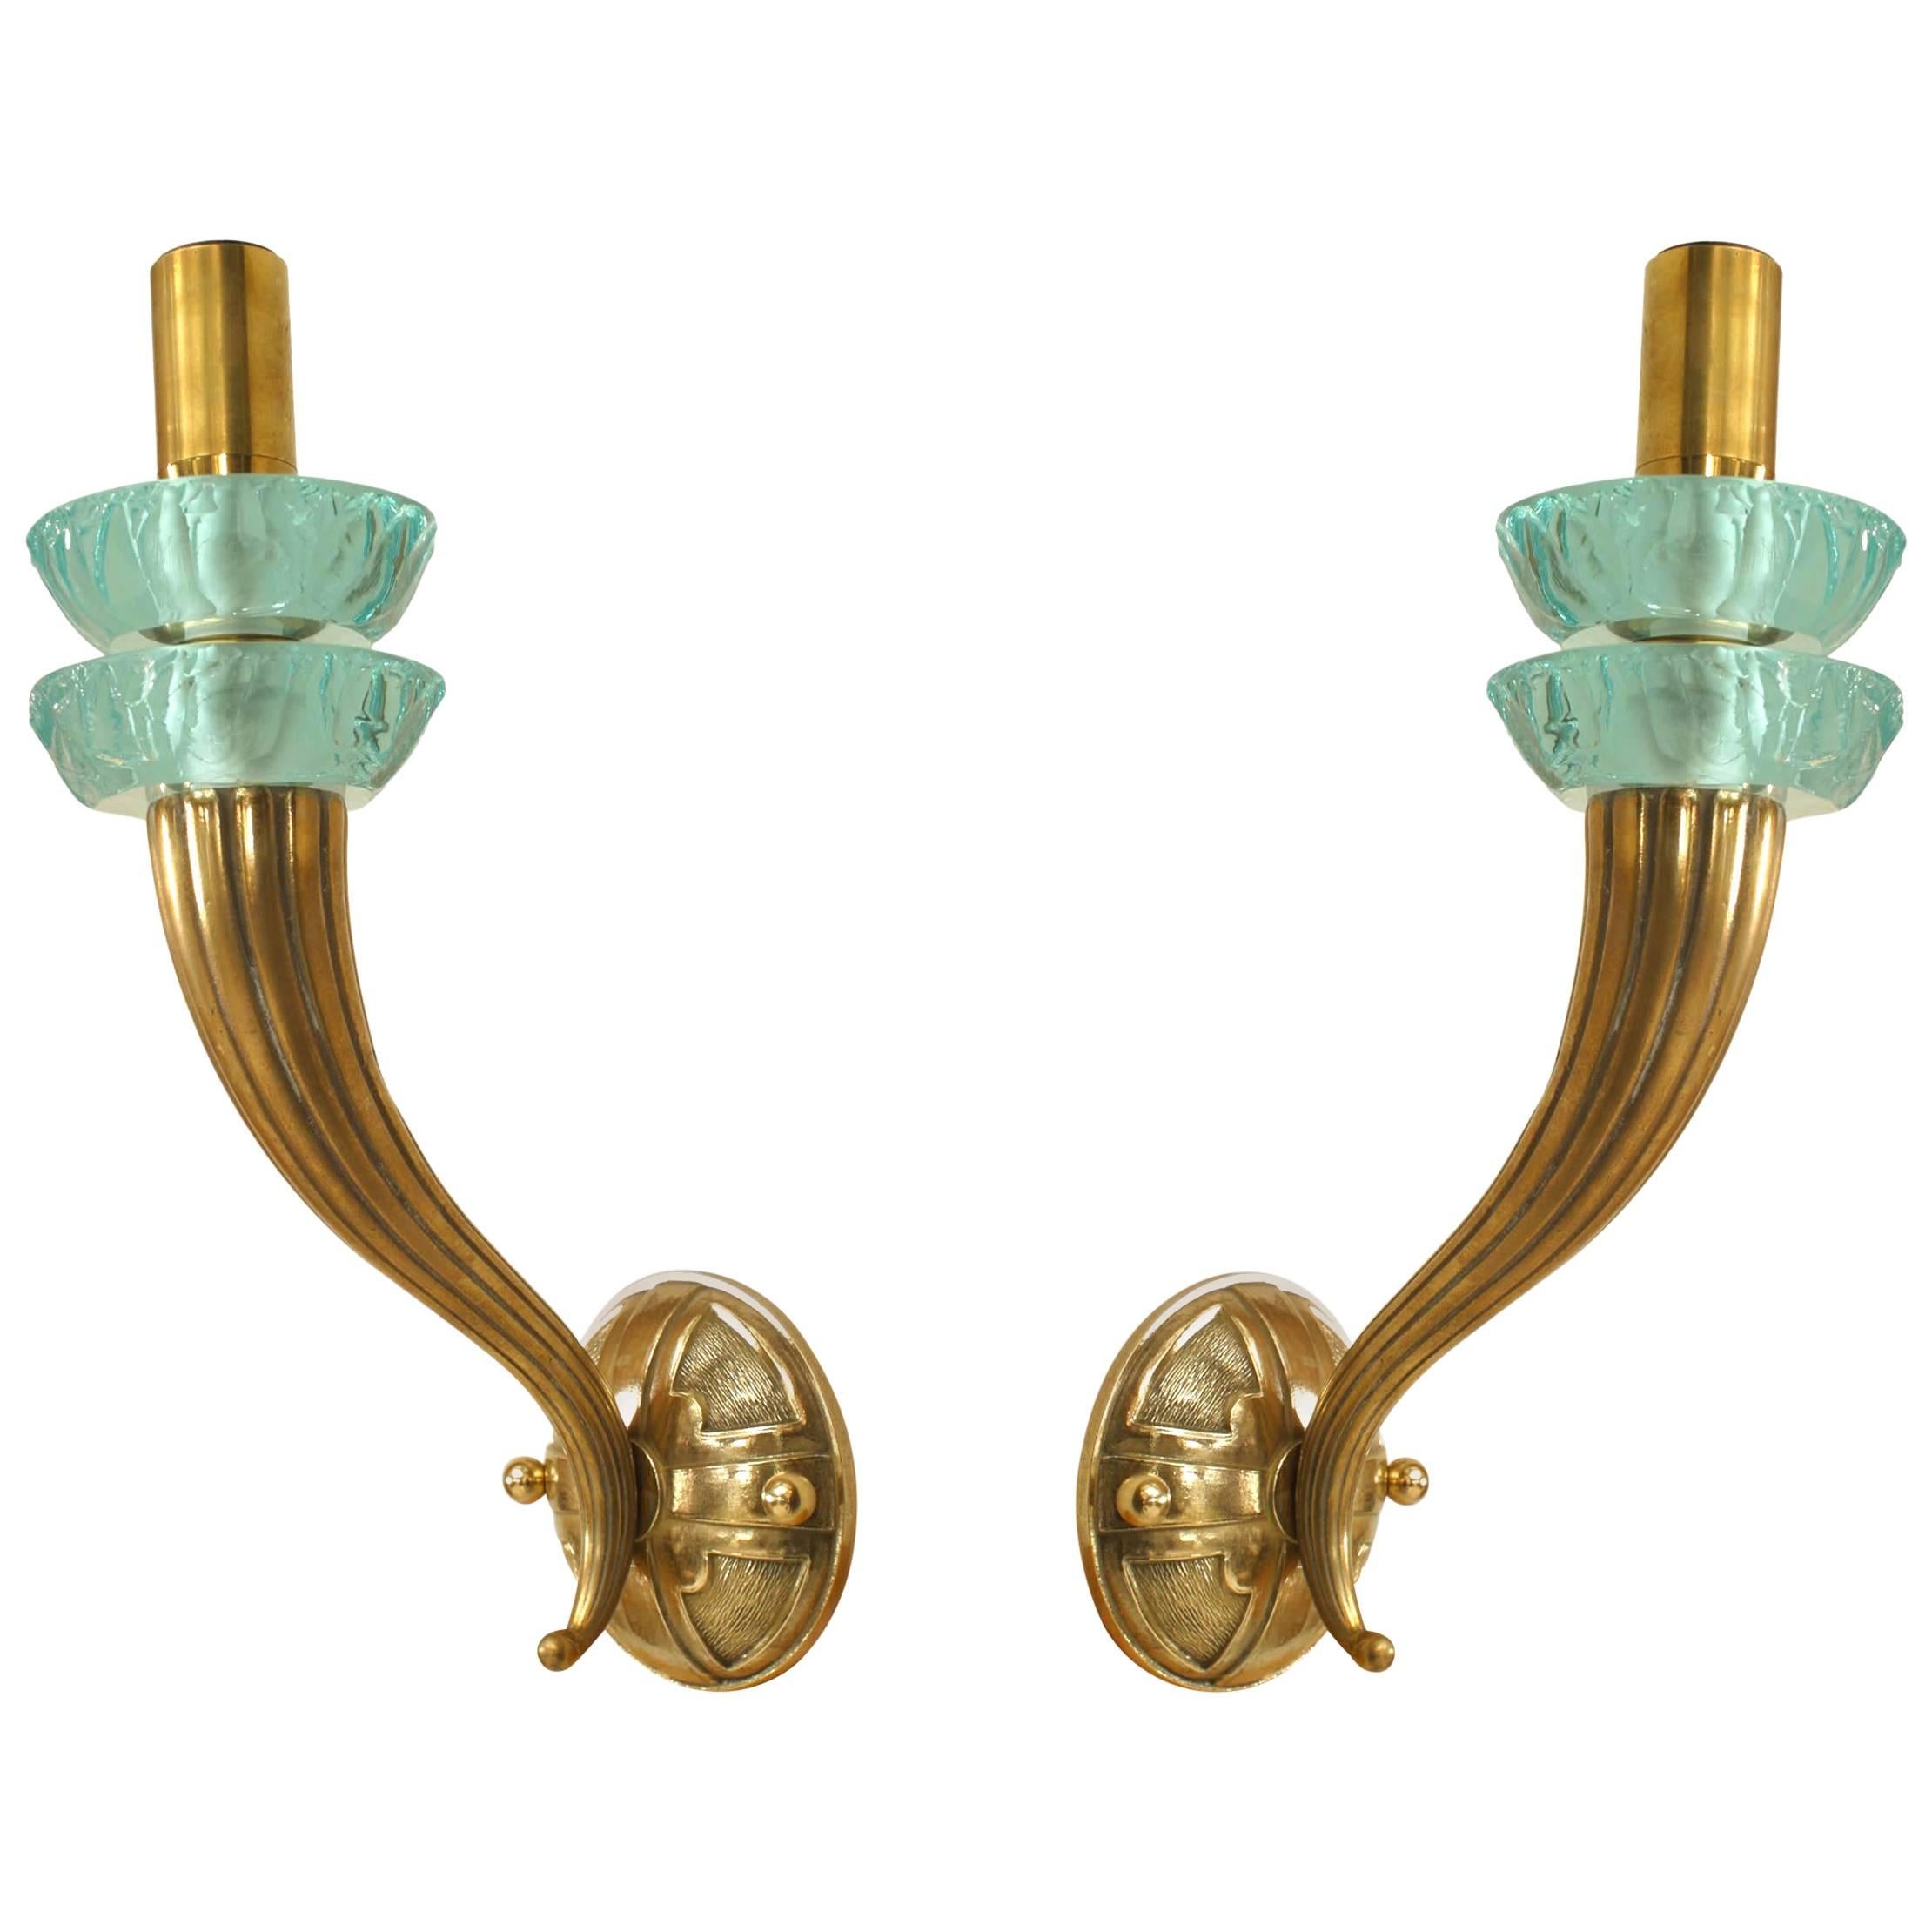 Pair of French Art Deco Brass and Turquoise Wall Sconces